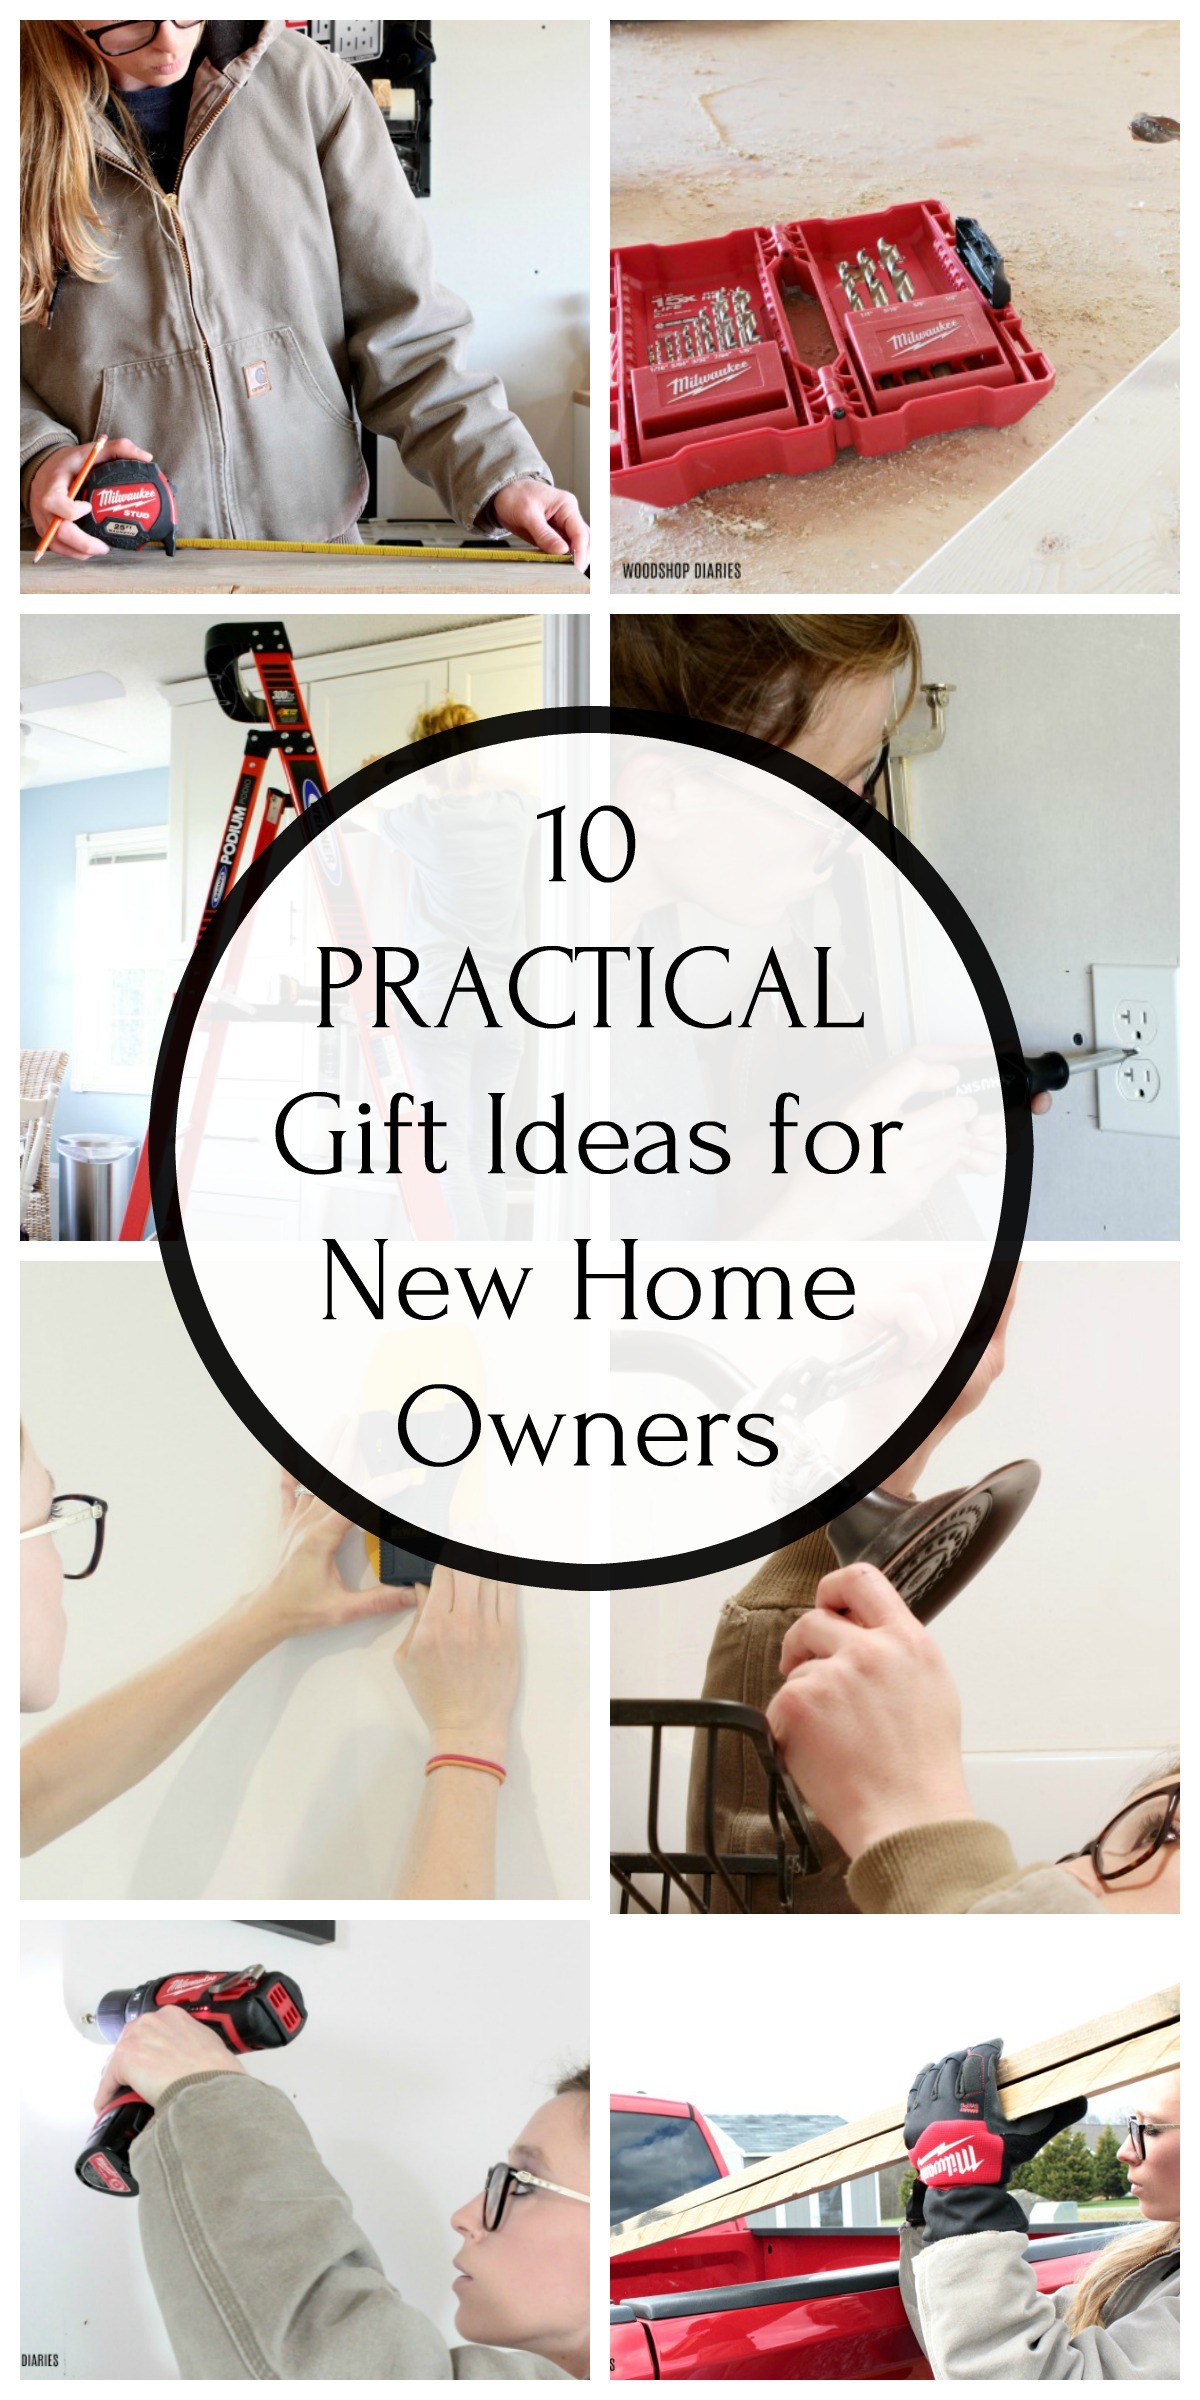 Collage image of gift ideas for new homeowners